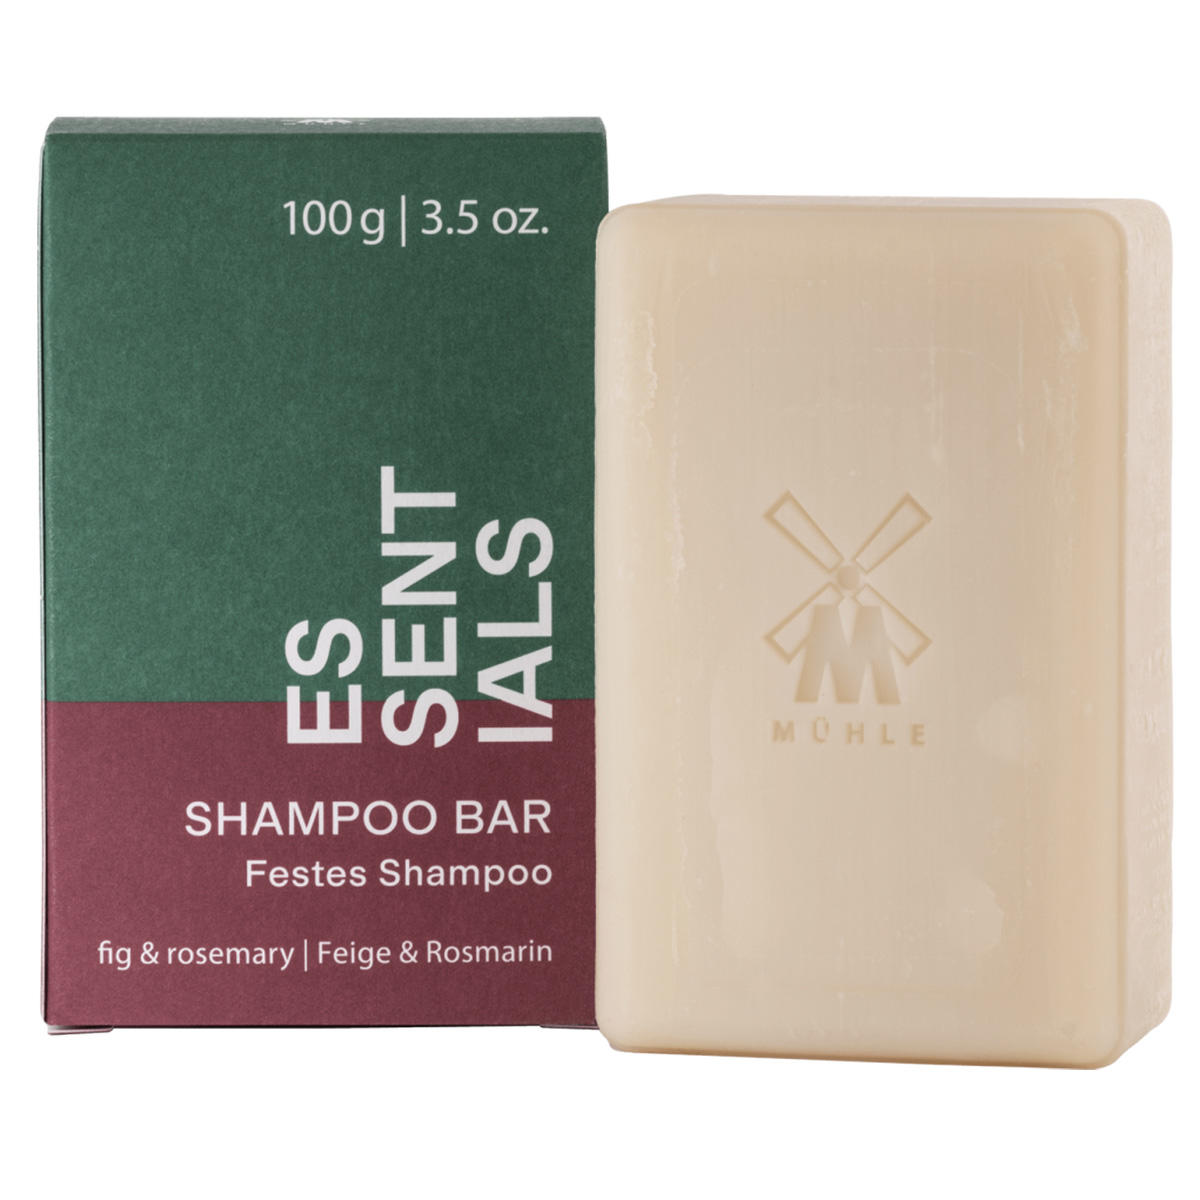 MÜHLE ESSENTIALS Solid shampoo Fig and rosemary 100 g - 1